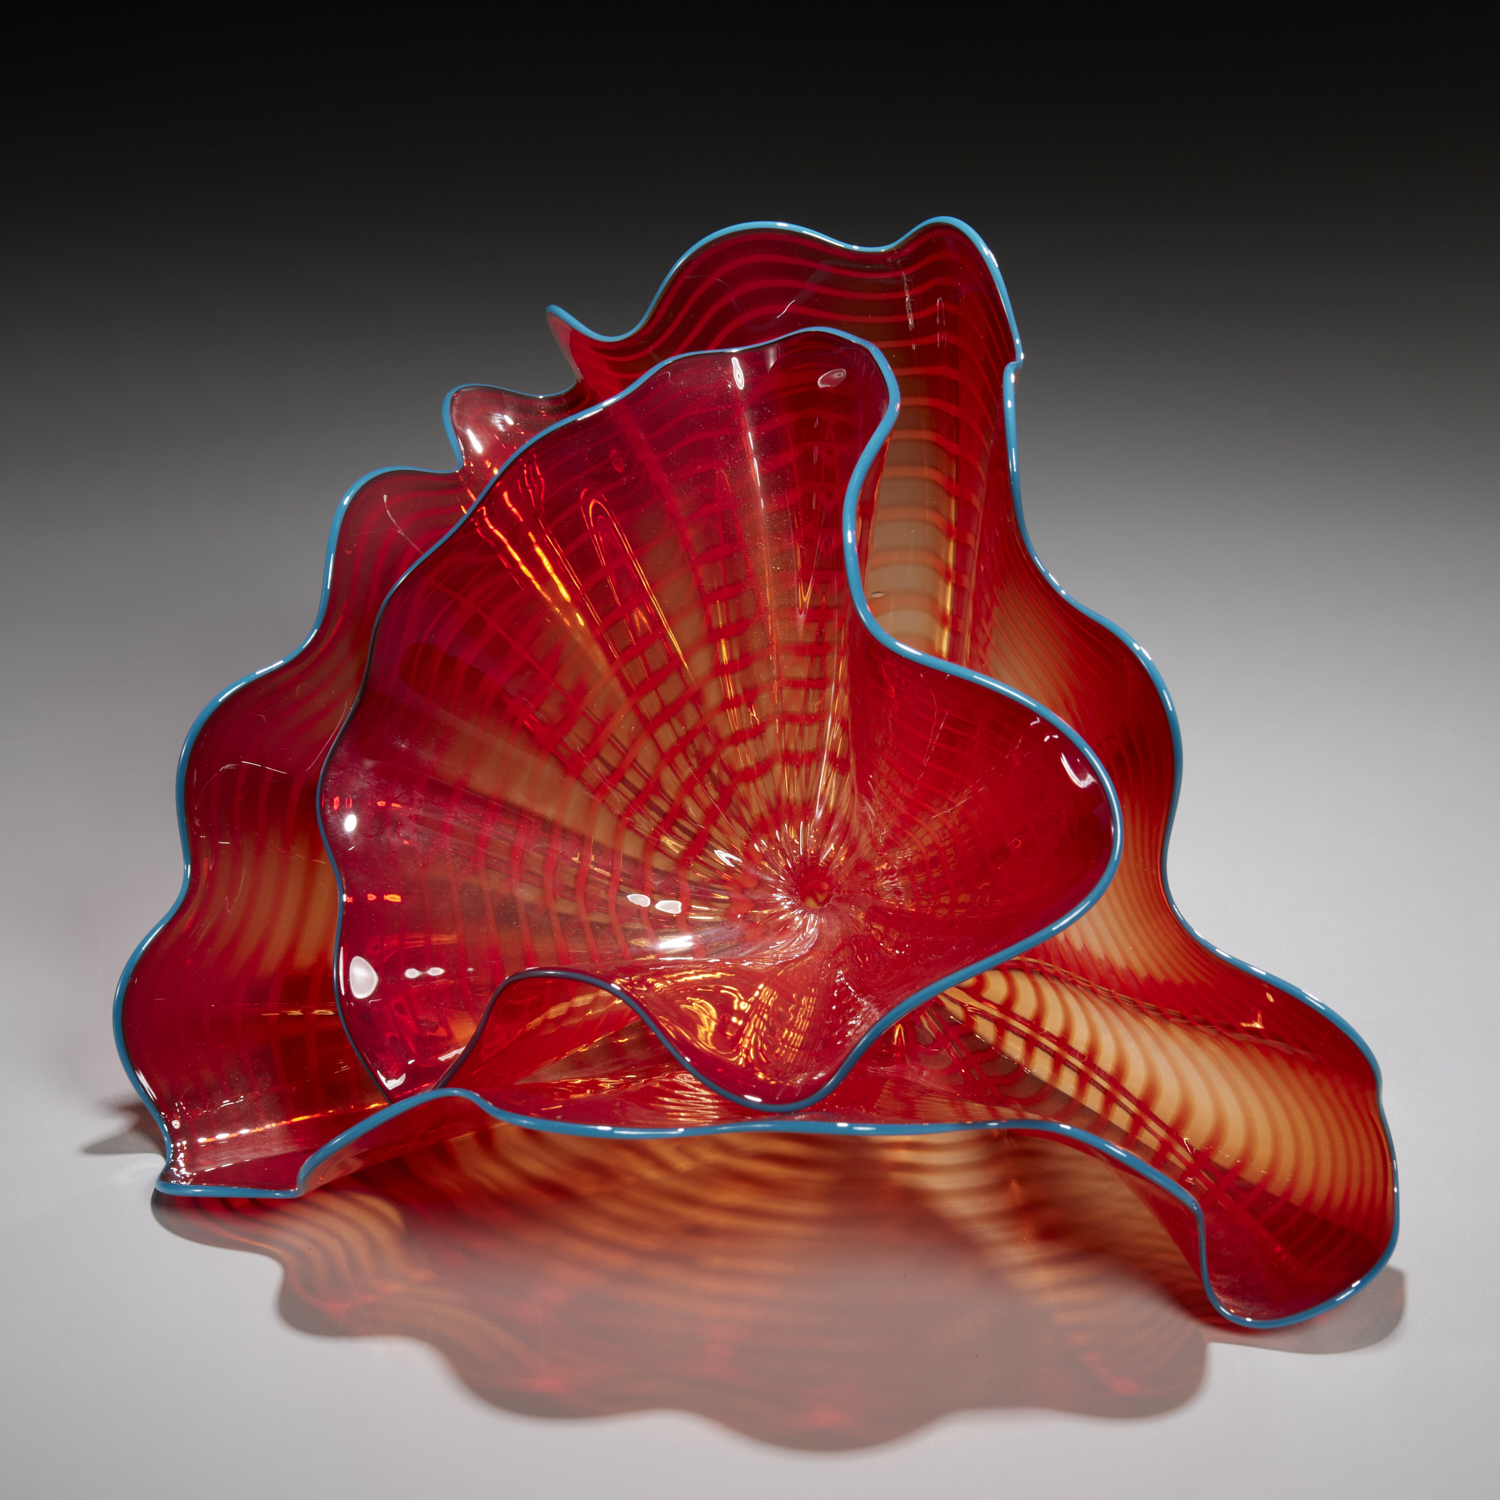 DALE CHIHULY, 2-PIECE PERSIAN SET, 2004